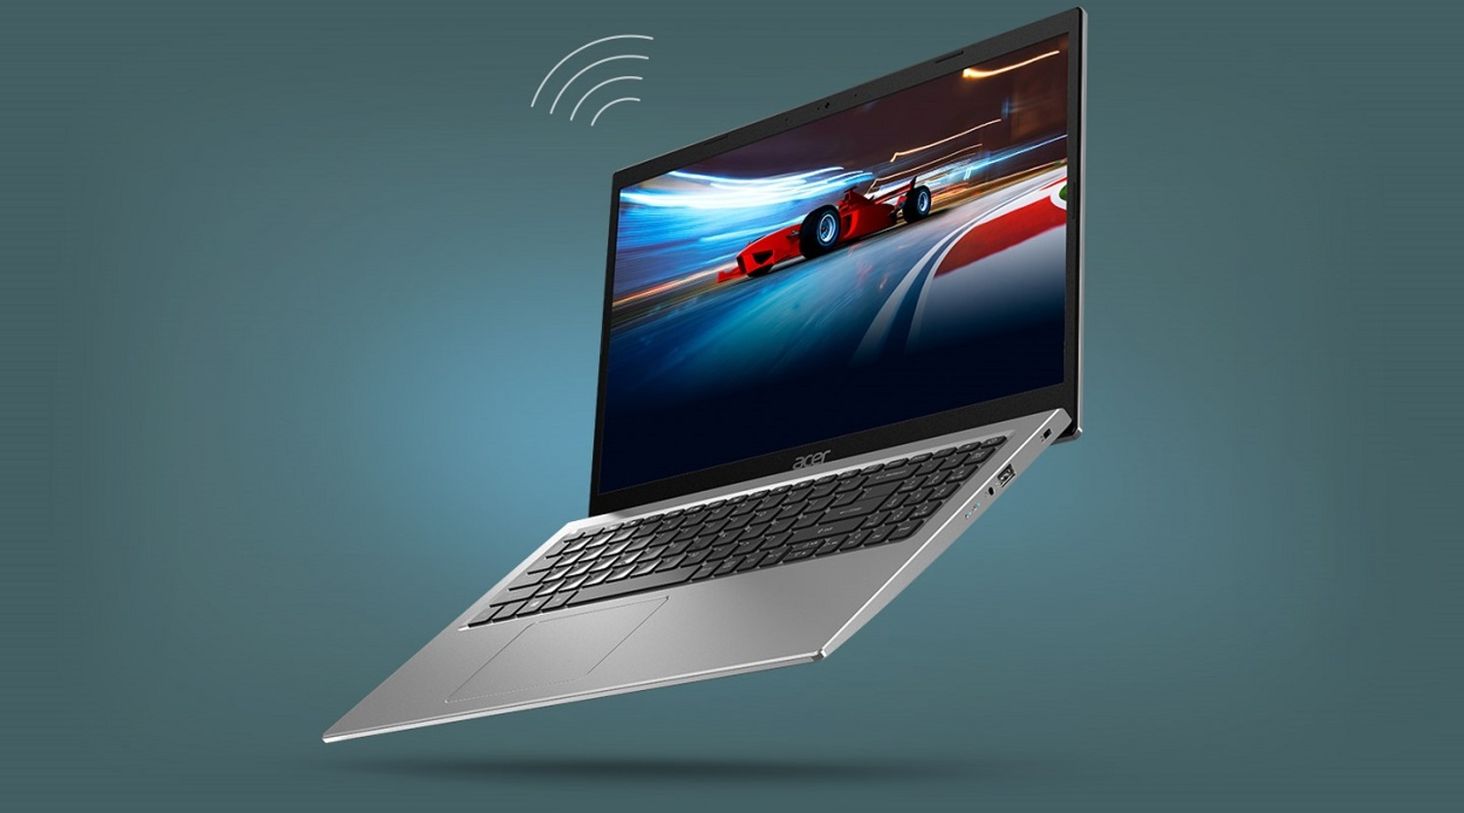 $480+ Aspire 3 laptop is powered by an Intel Core i3-N305 Alder